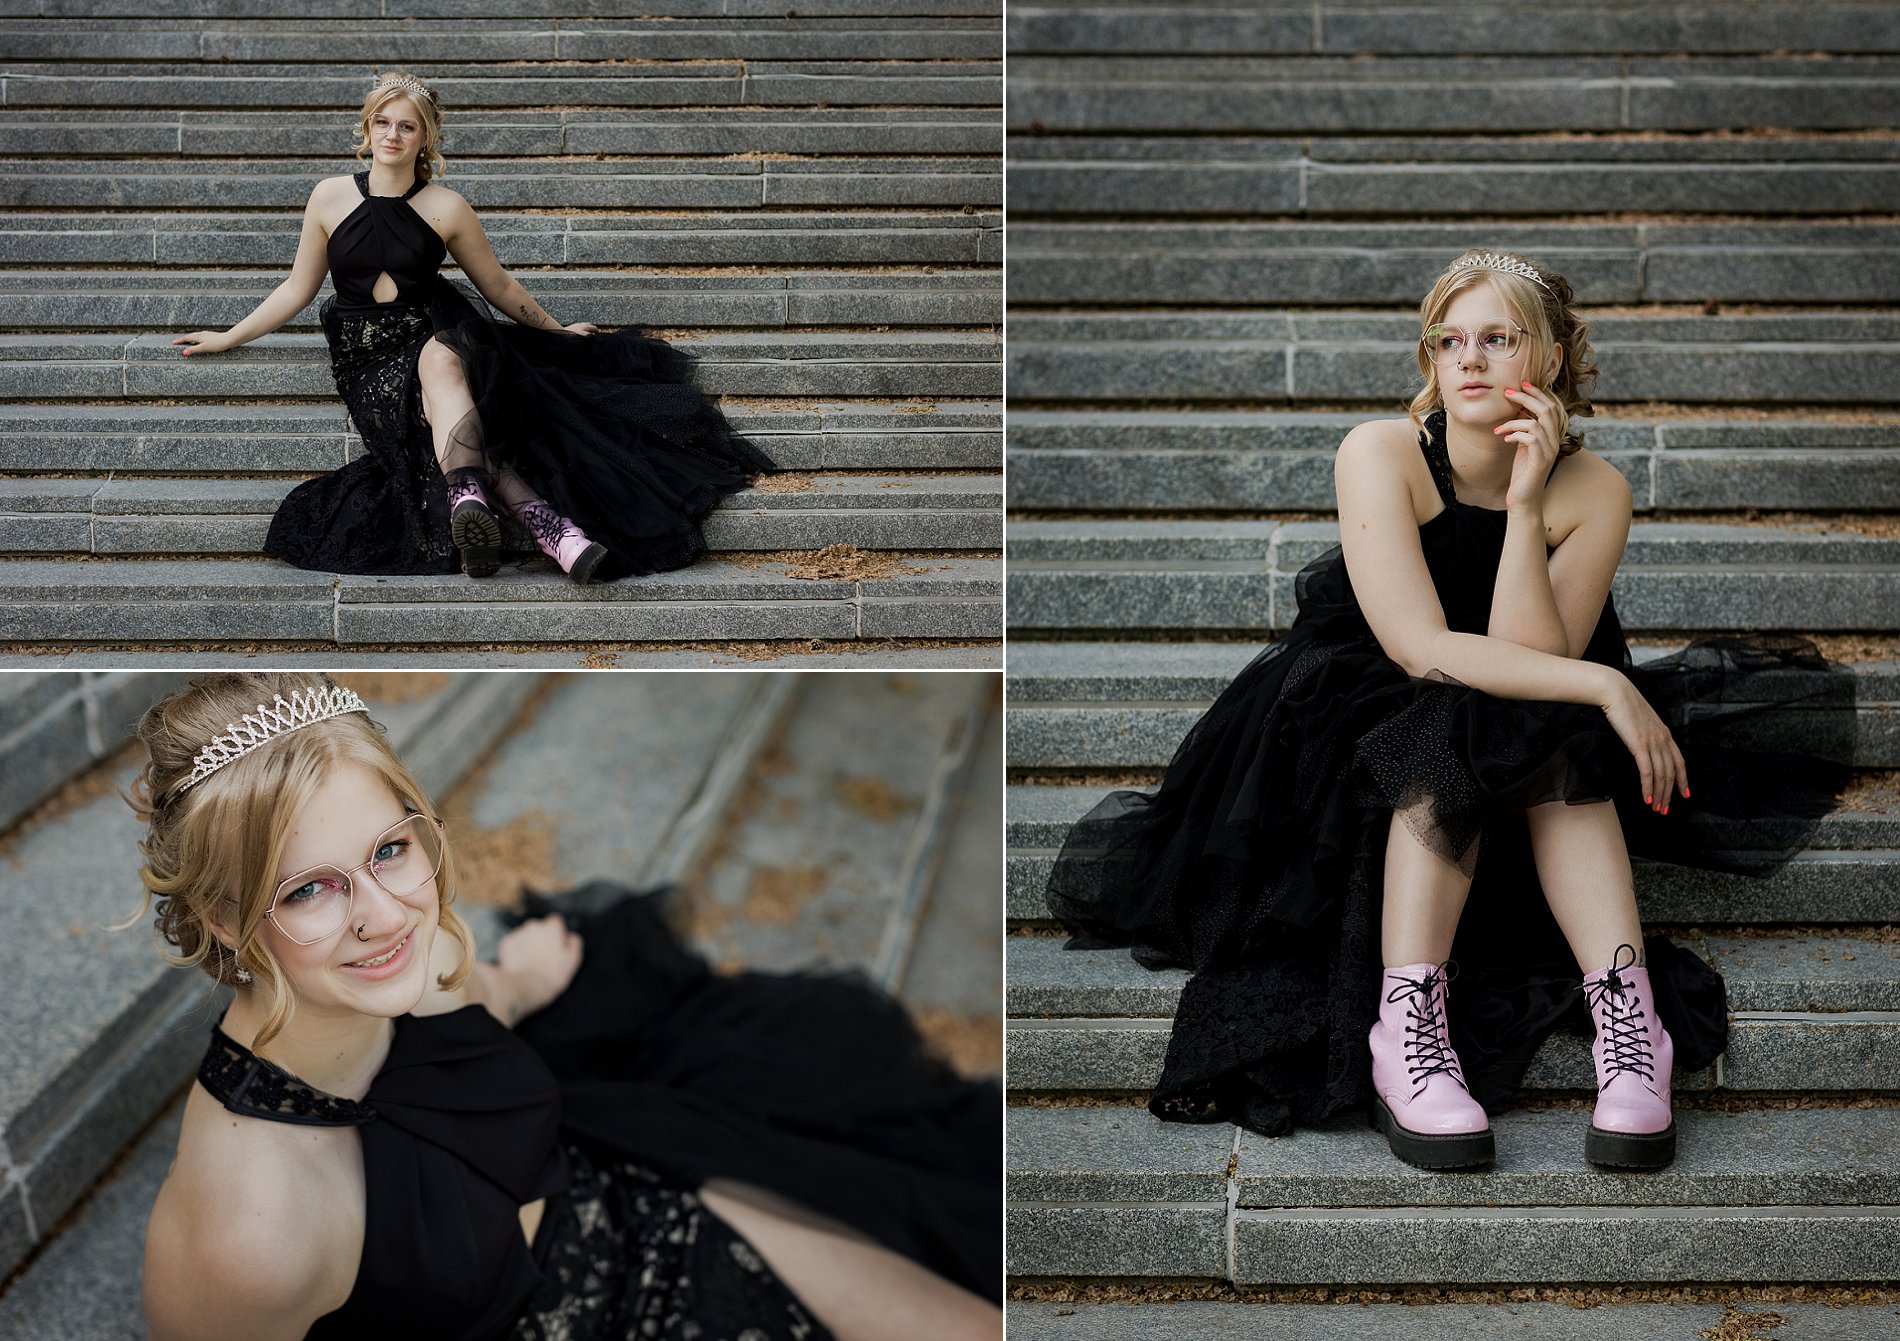 Jana wore a black lace grad dress and pink Steve Madden boots for her graduation photos in Saskatoon.